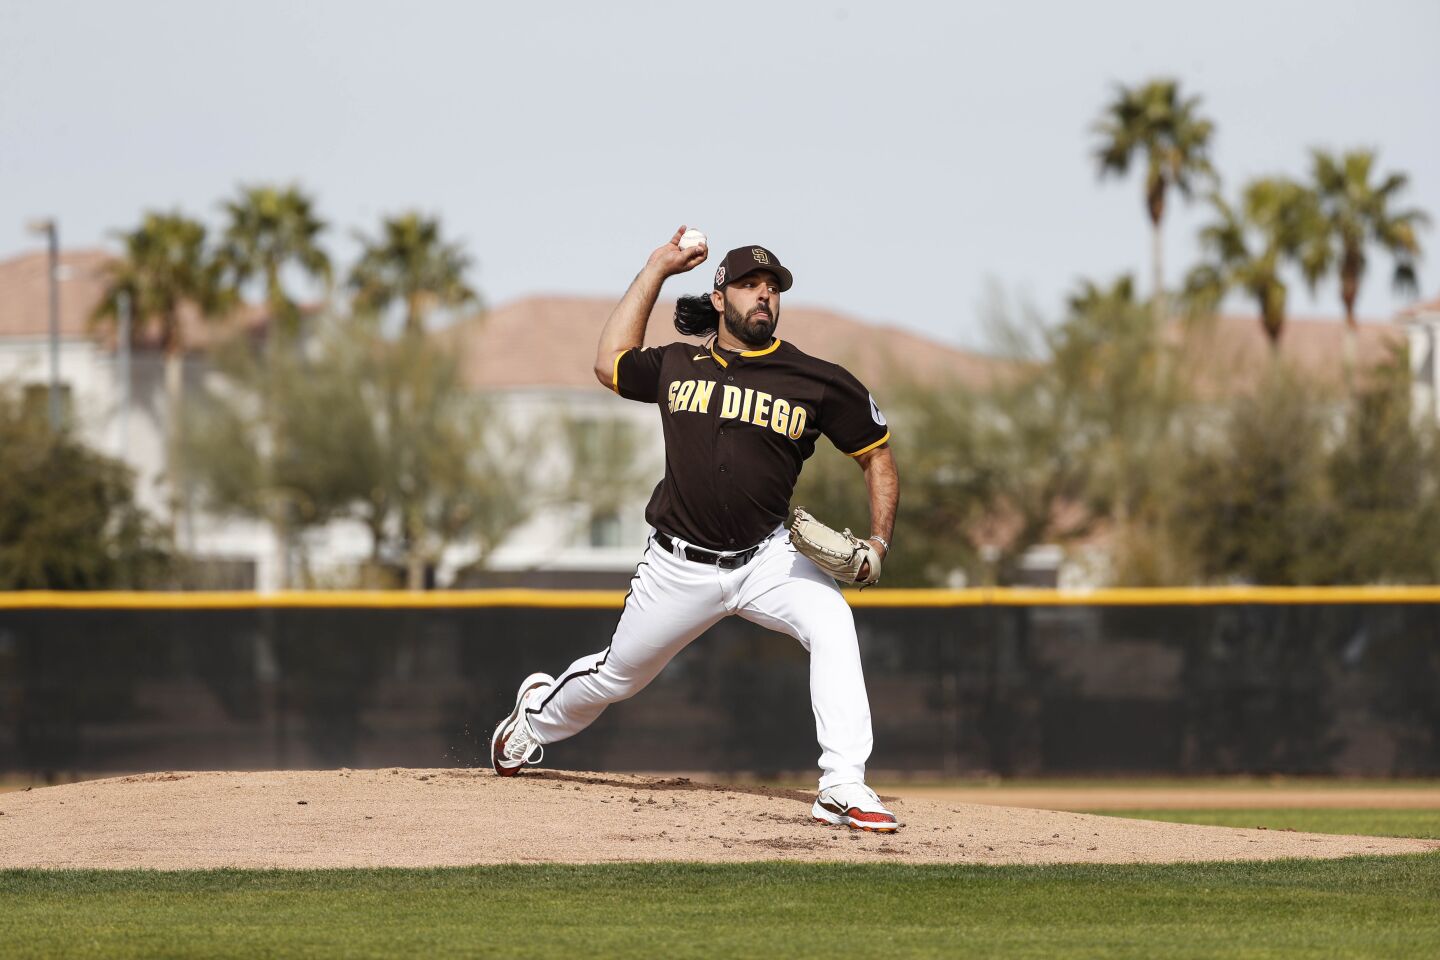 Padres relief pitcher Nabil Crismatt (74) tosses a pitch during a spring training practice at Peoria Sports Complex on Friday.